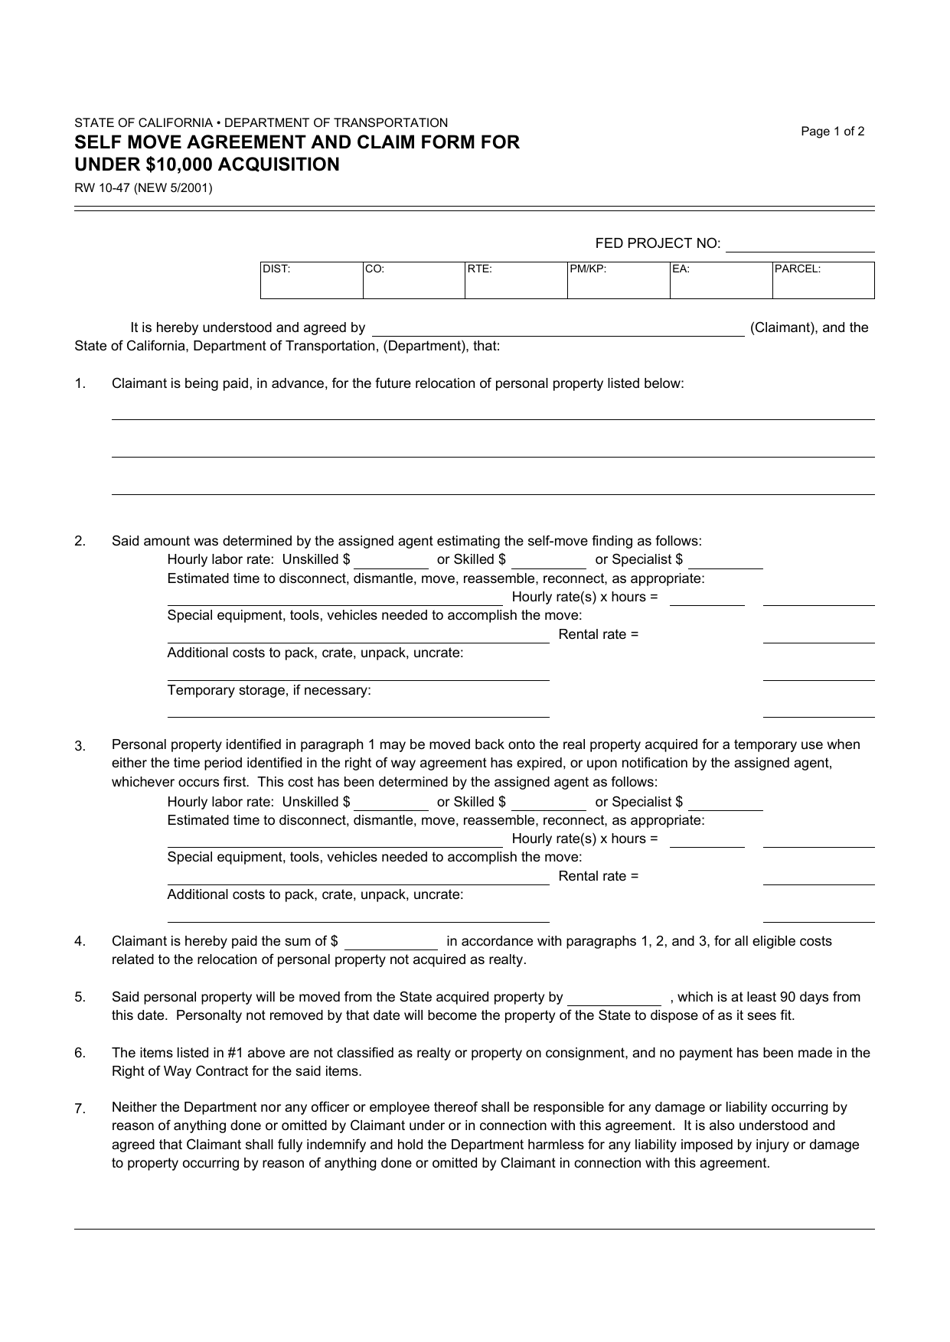 Form RW10-47 Self-move Agreement and Claim Form for Under $10,000 Acquisition - California, Page 1